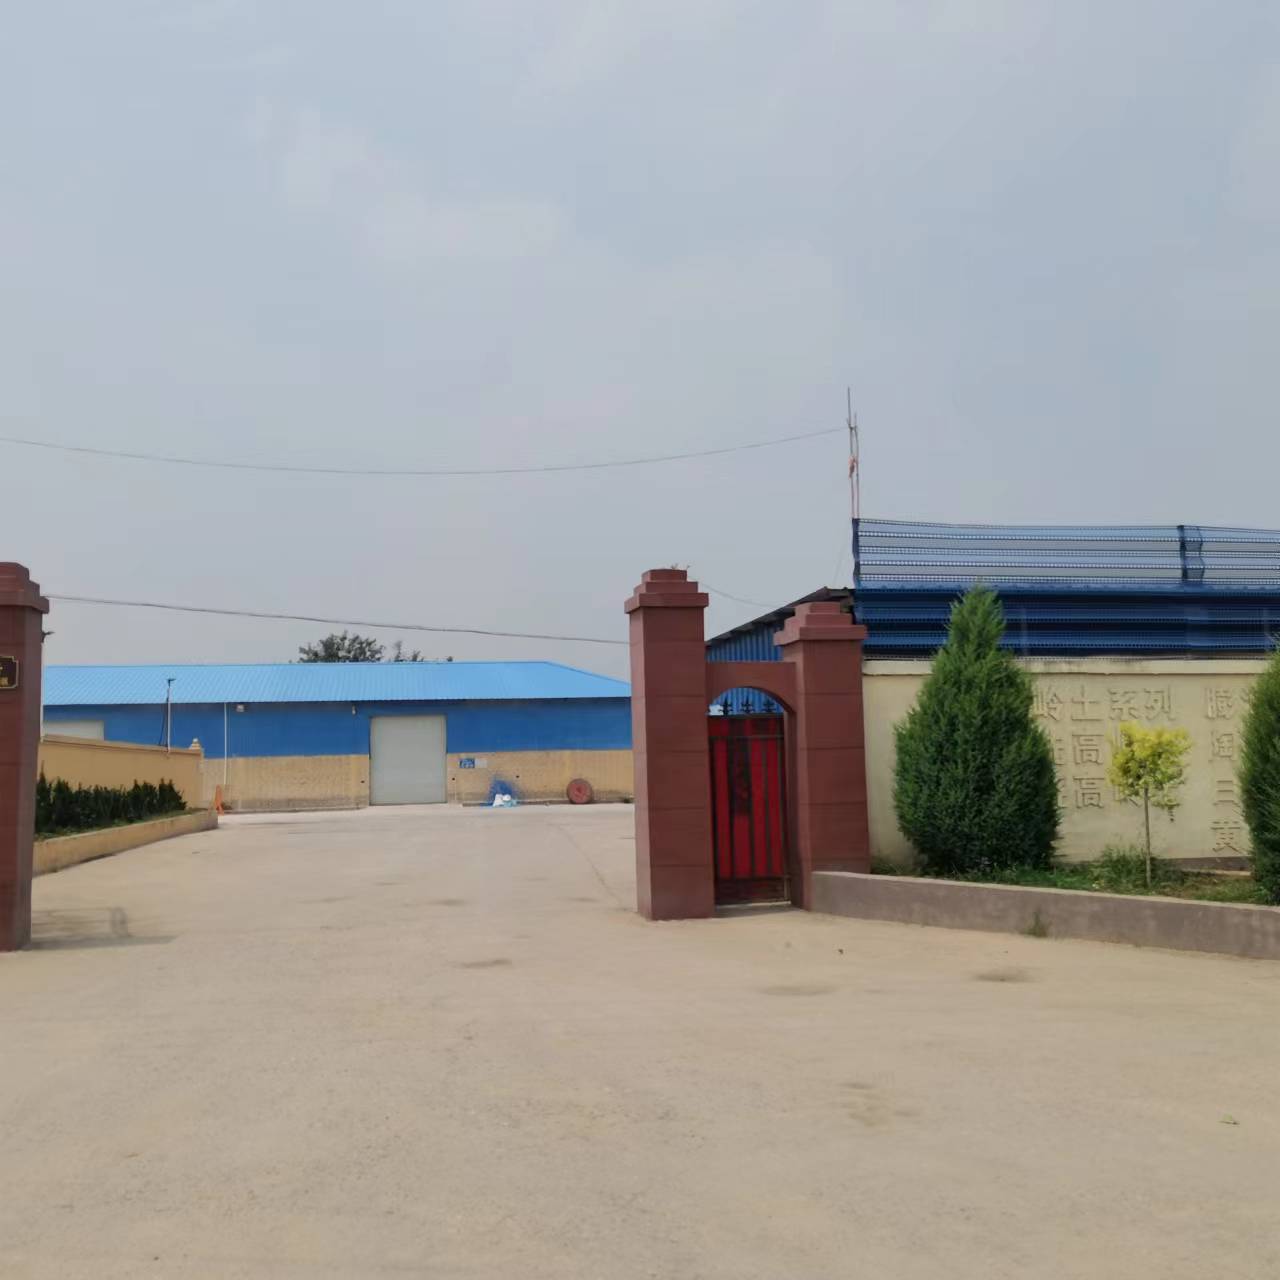   Lingshou Tengyan Mineral Products Processing Factory